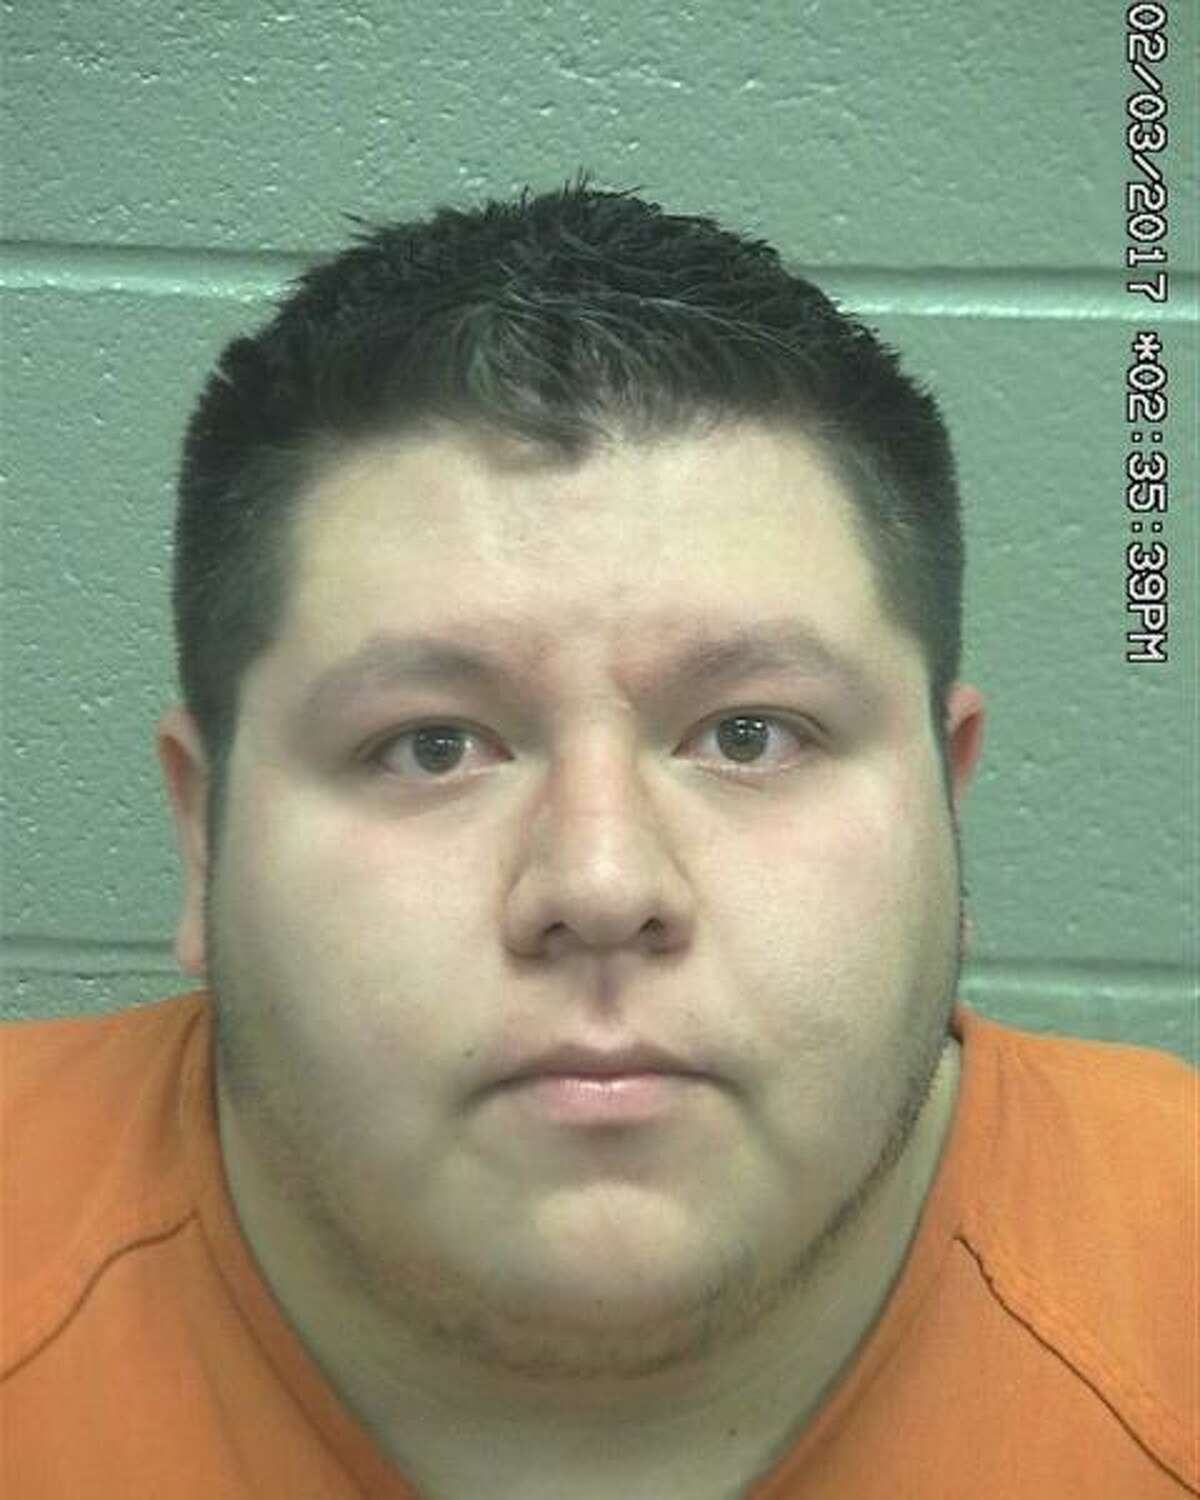 Santiago “Jimmy” Zepeda III, 25, pleaded guilty to one count of aggravated sexual assault of a child, according to a press release from the District Attorney’s Office, in exchange for a recommended punishment of 10 years confinement in the Texas Department of Criminal Justice and a waiver of his right to appeal.  